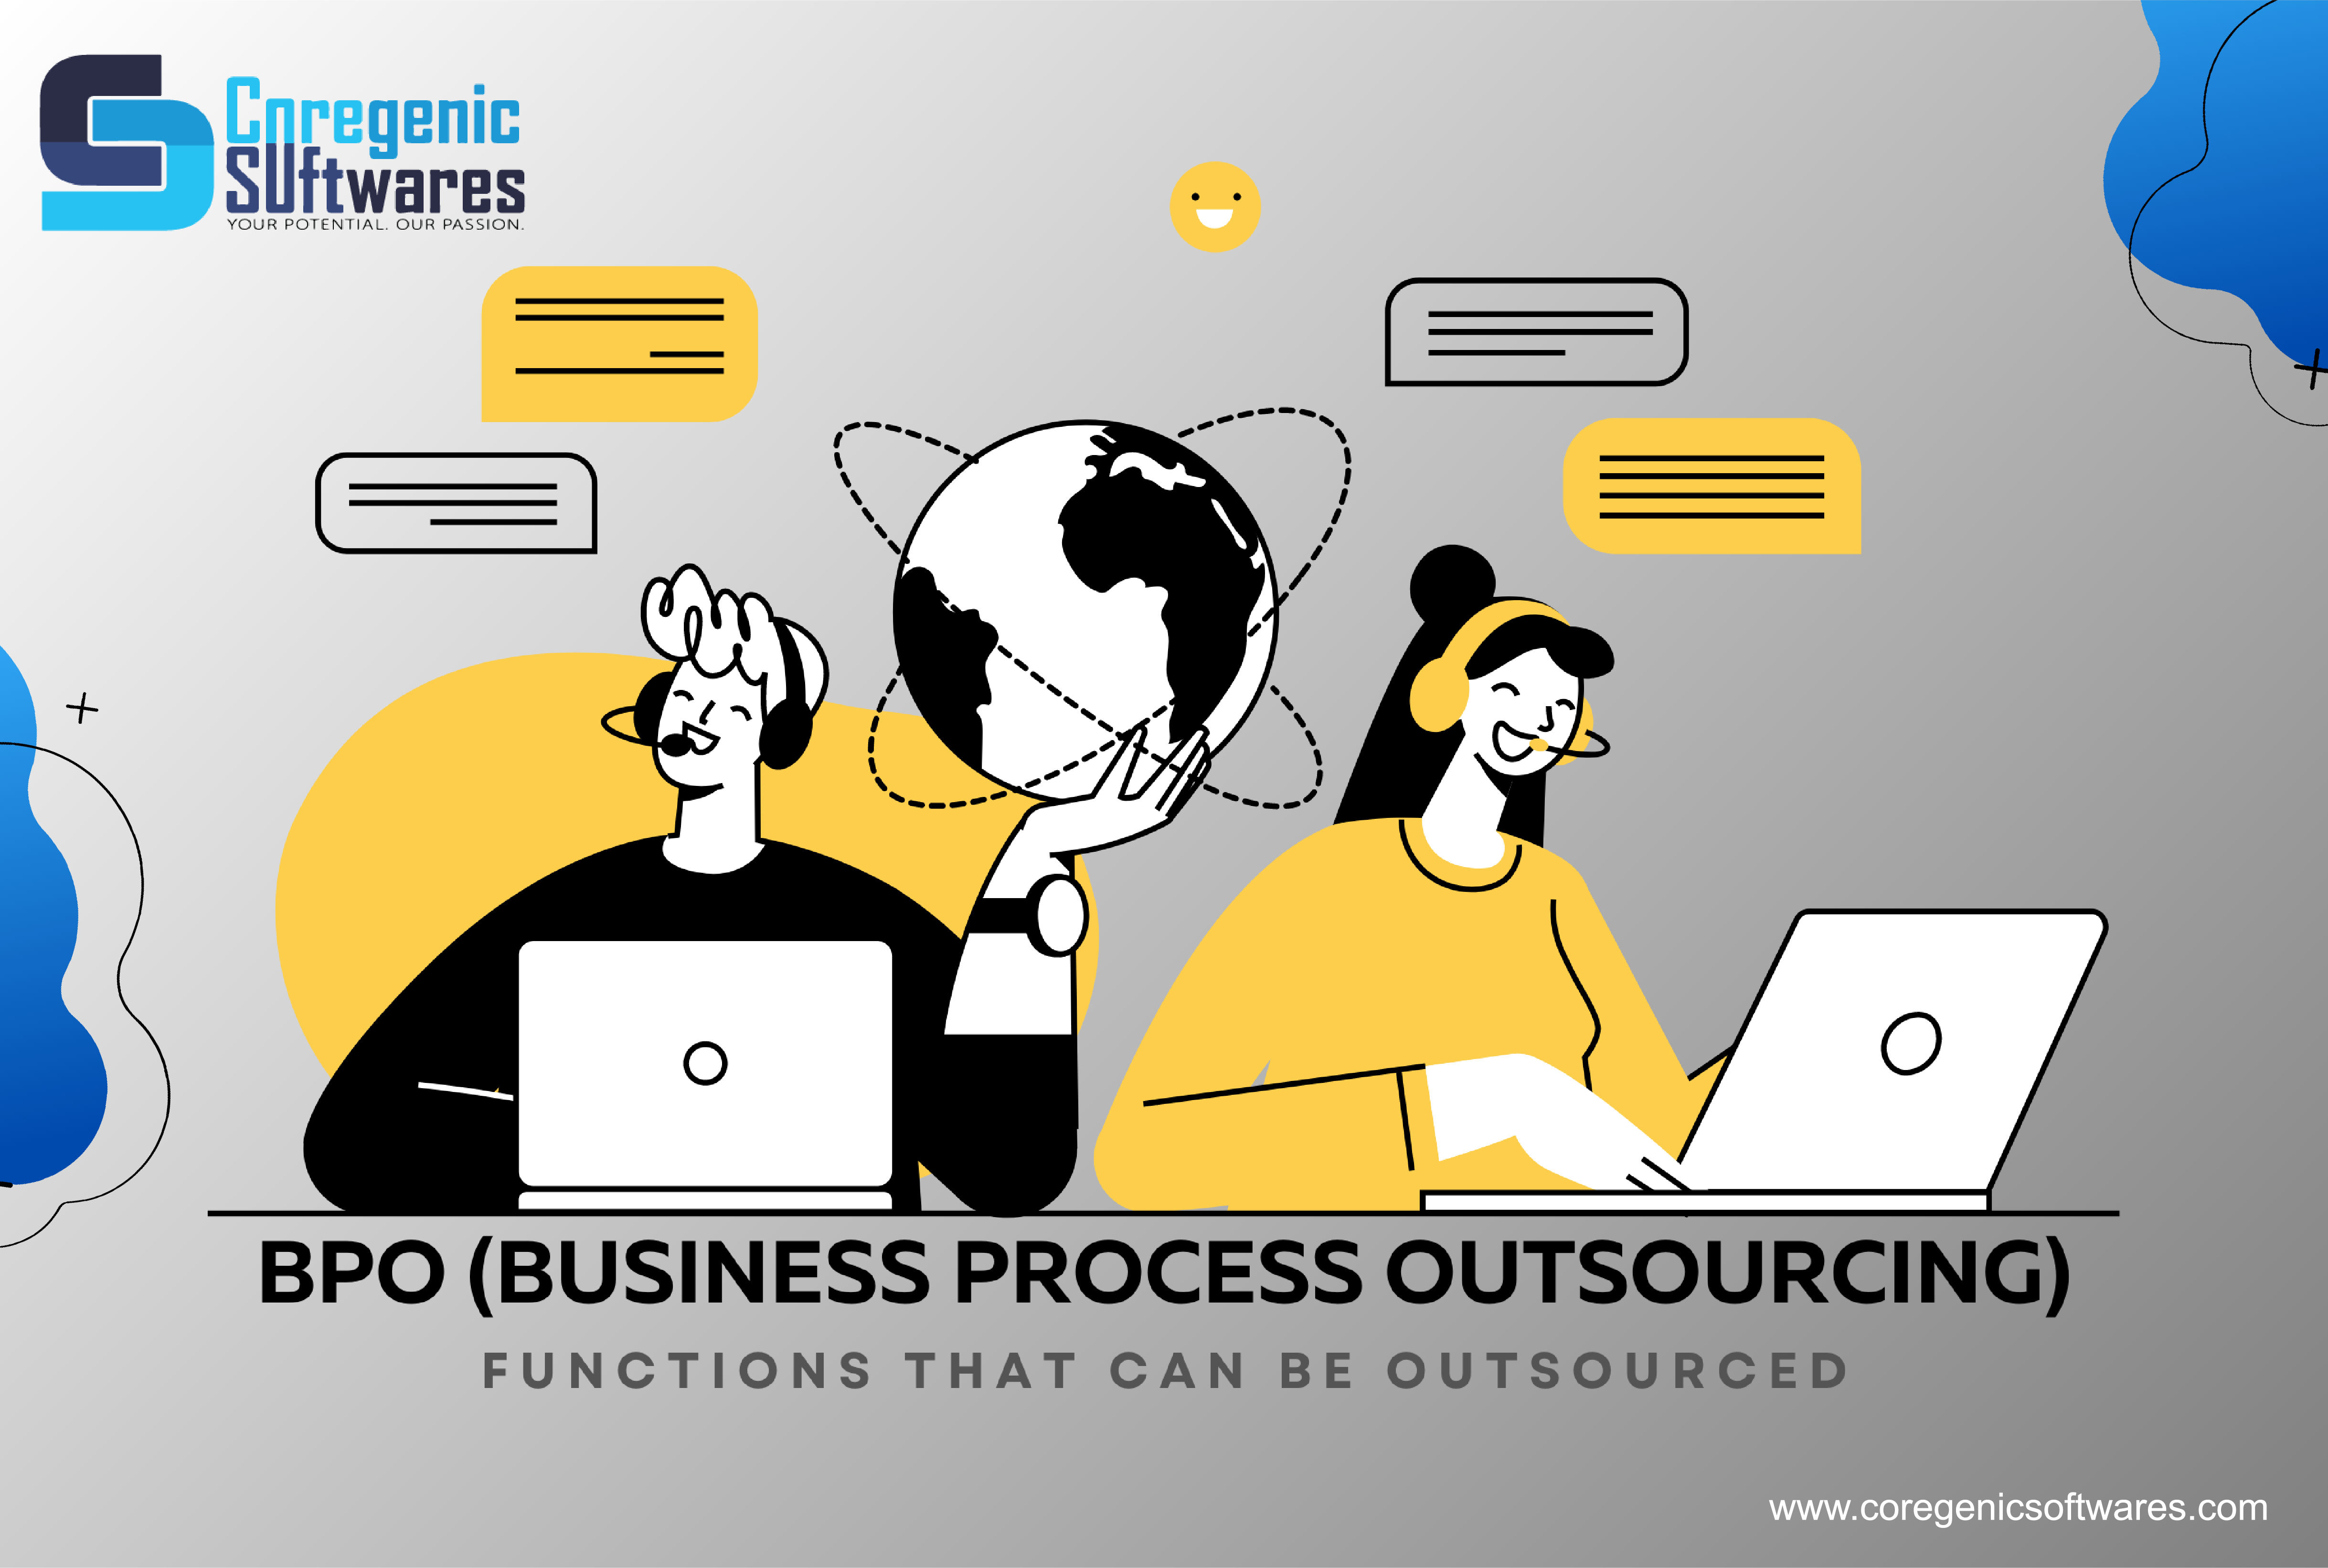 what is business process outsourcing essay